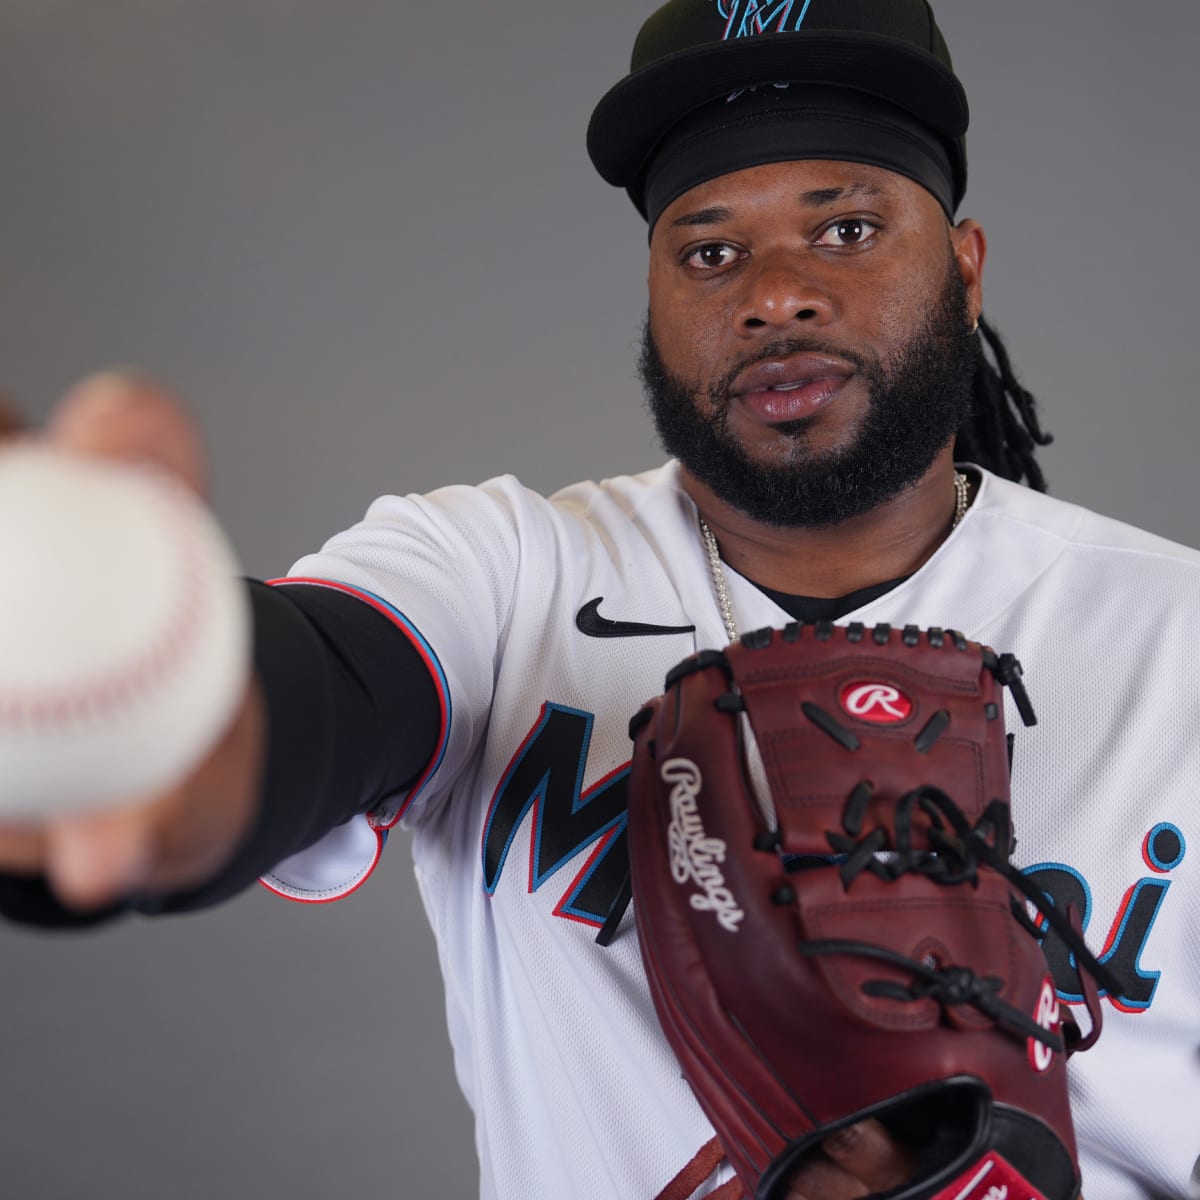 Johnny Cueto logs 7 strikeouts in White Sox debut